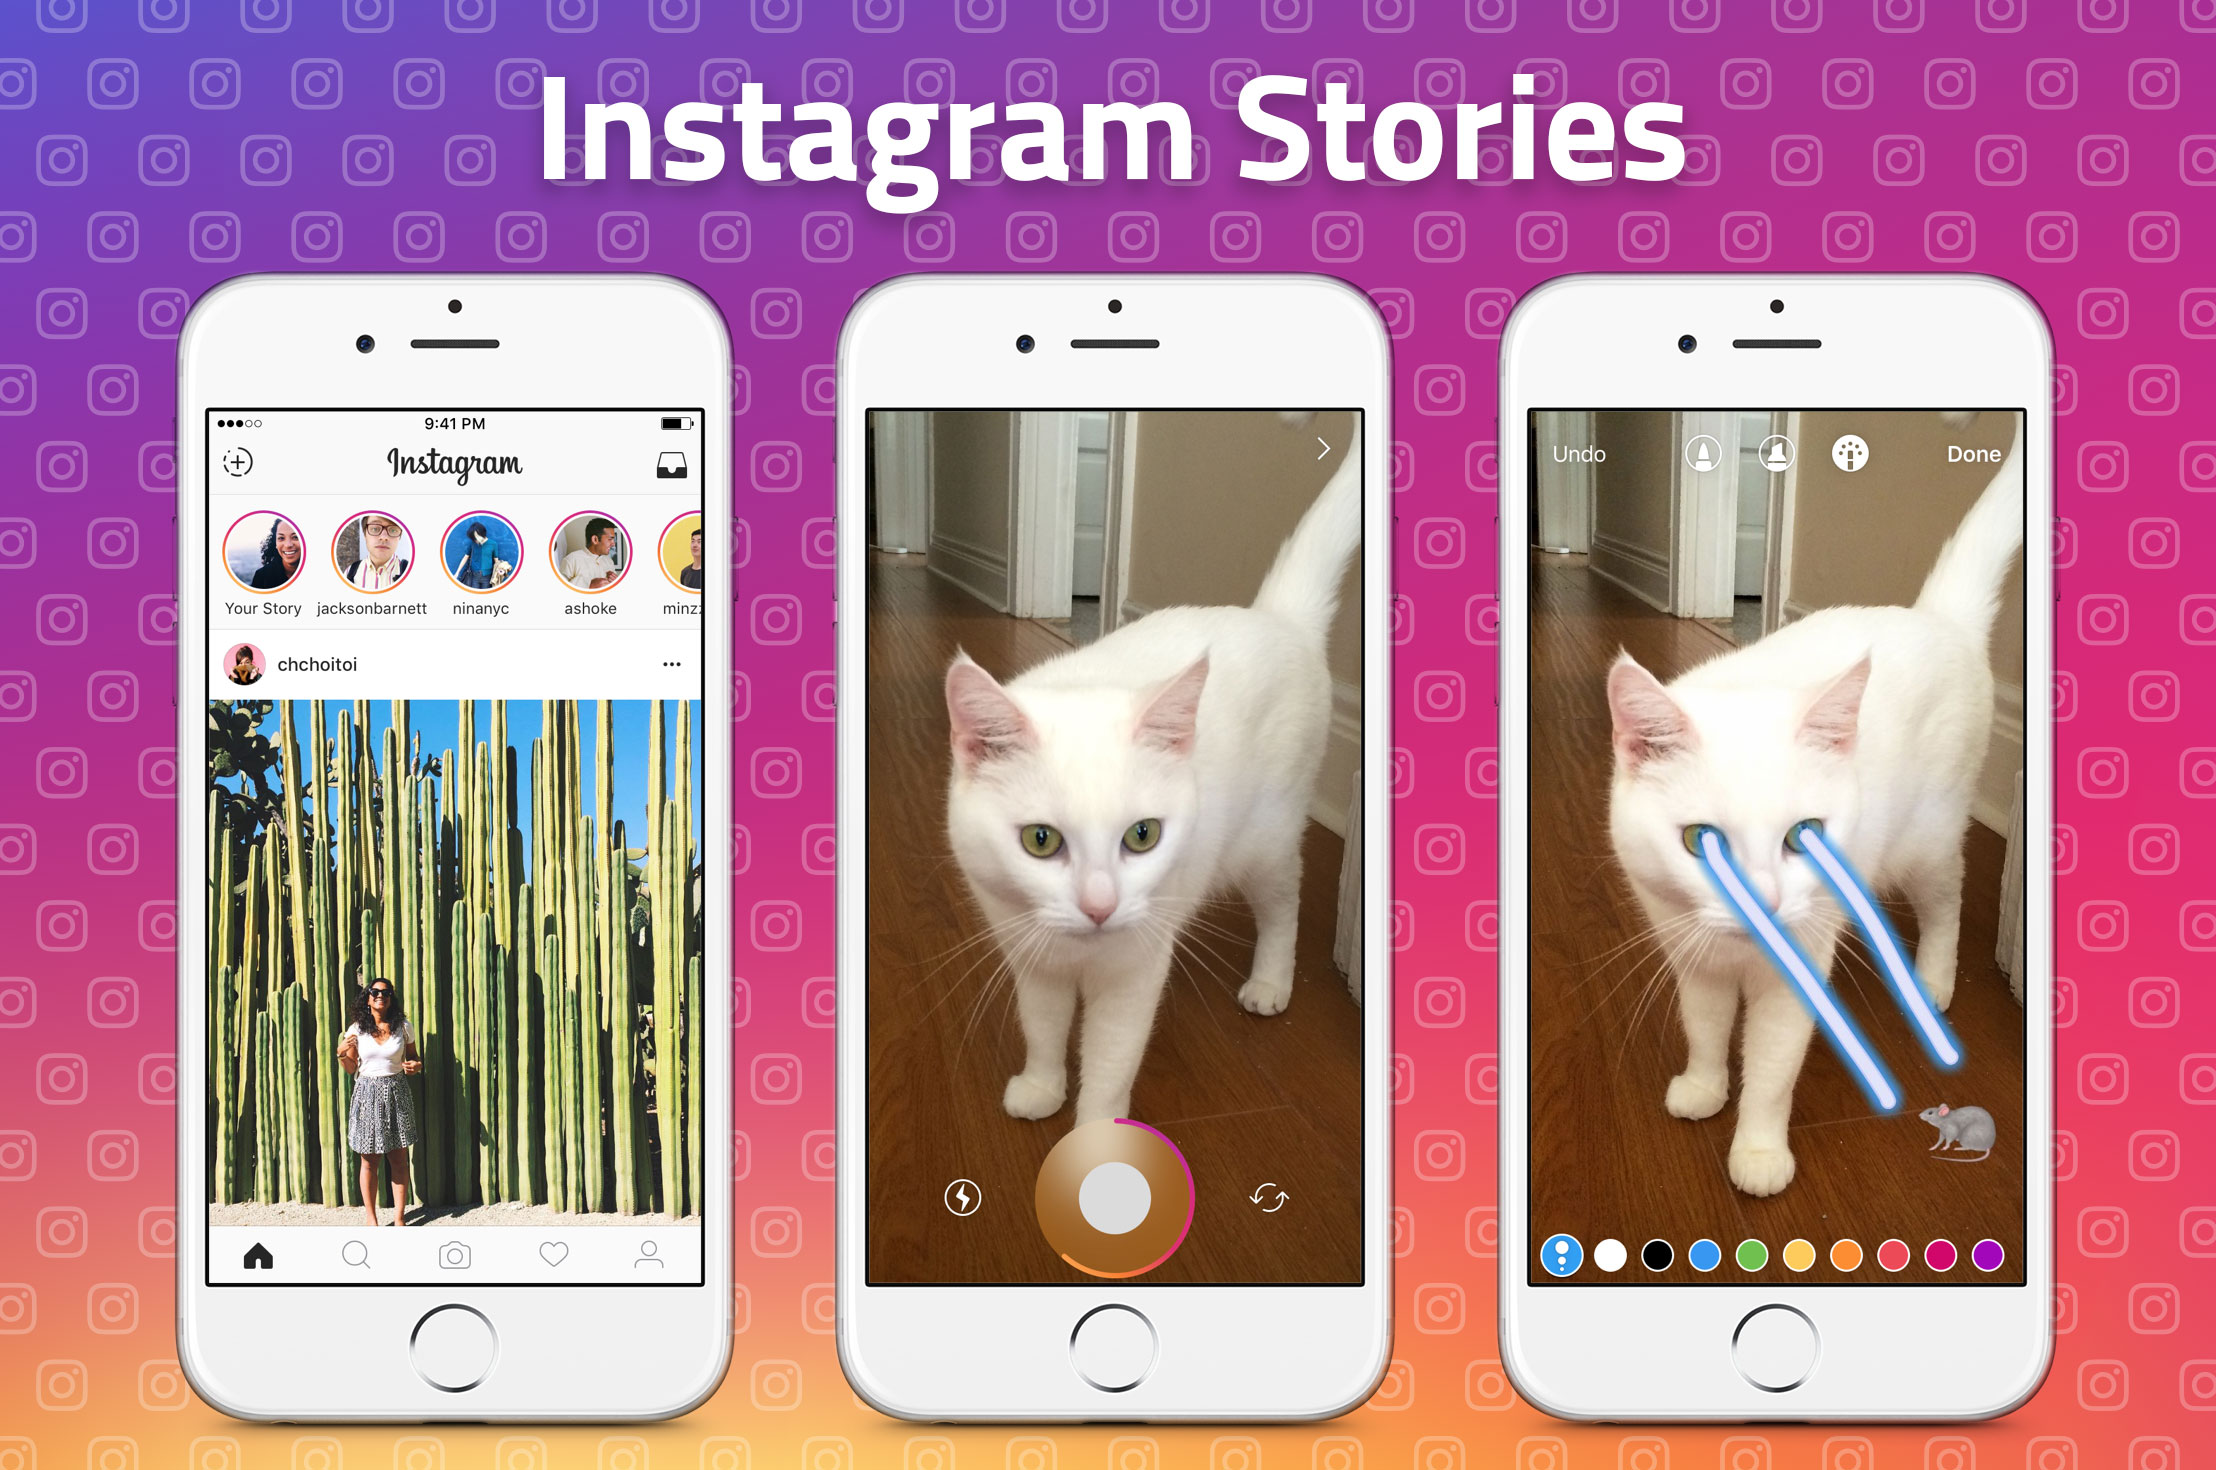 How does Instagram rank story viewers?